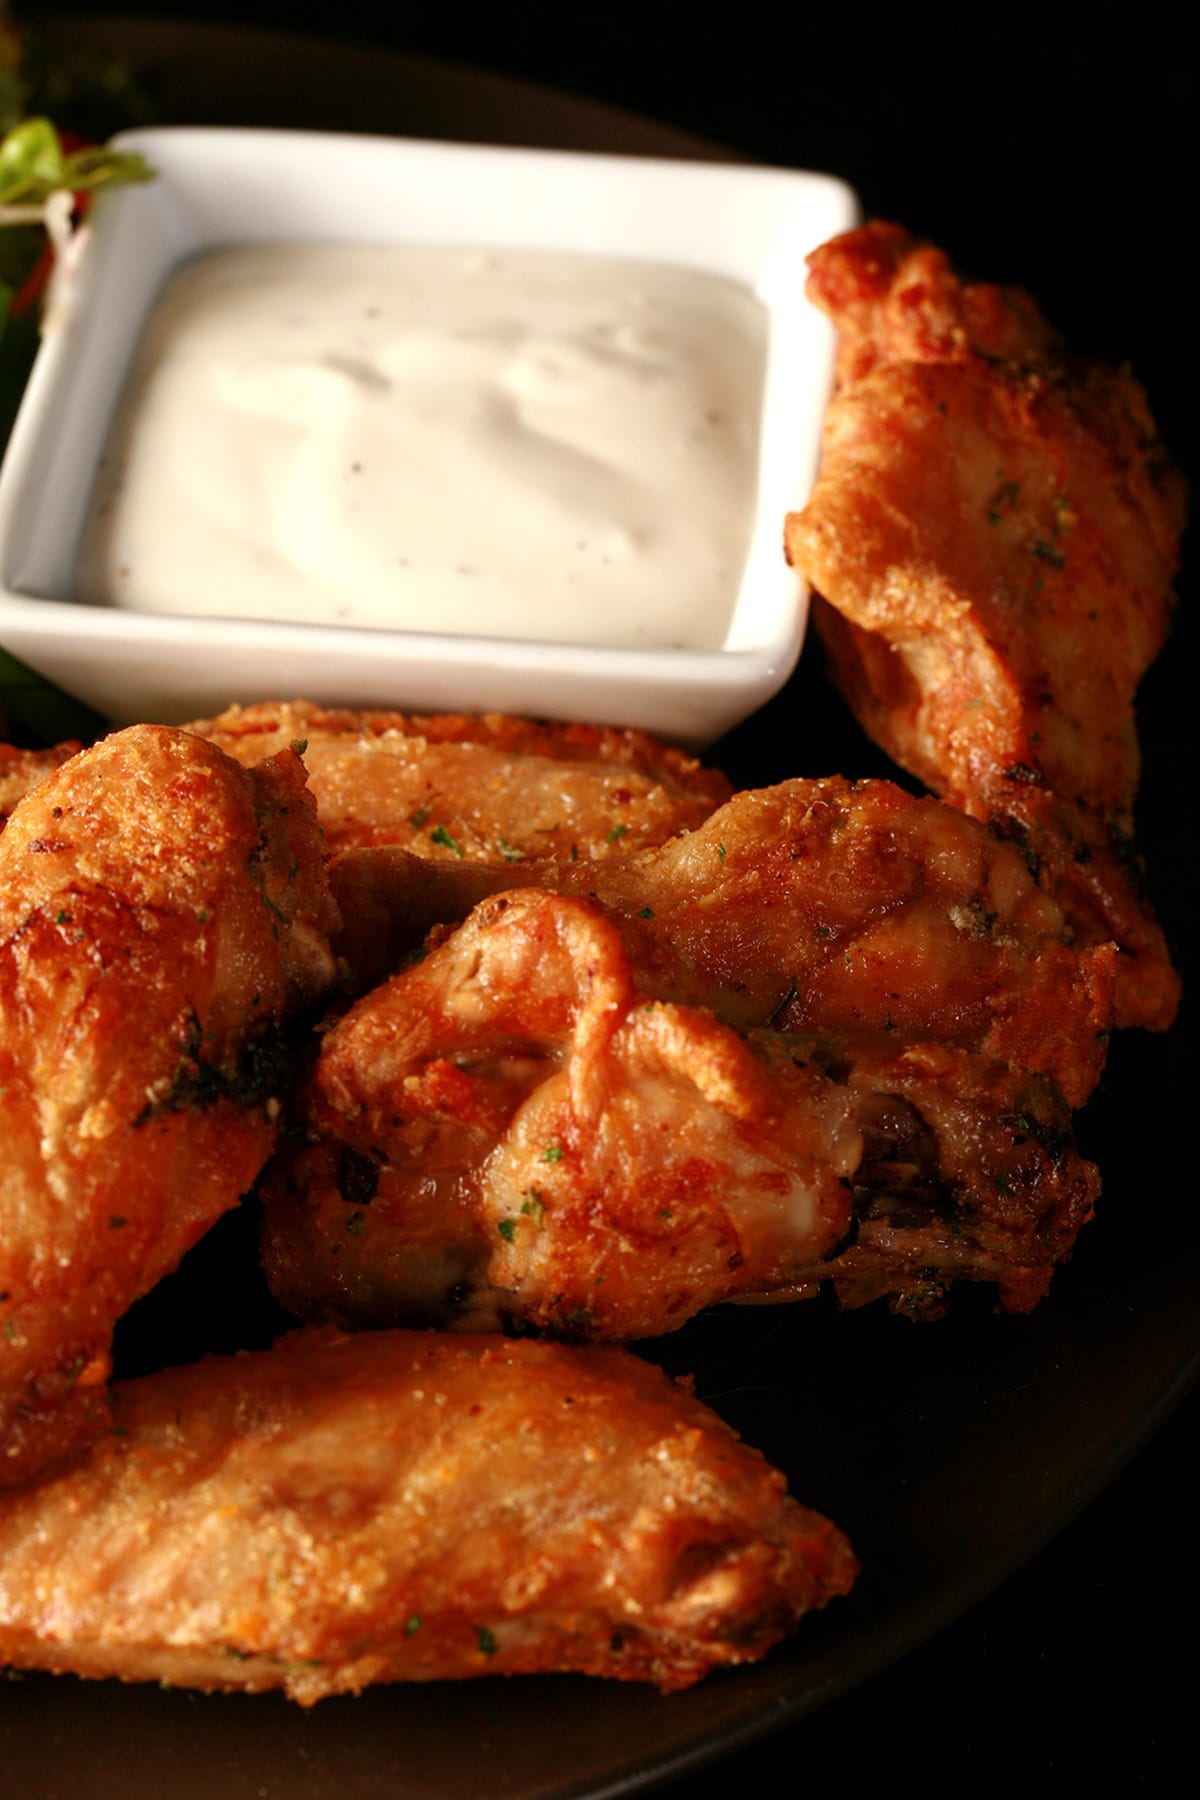 A close up view of a plate of tangerine-thyme dry rub seasoned wings.